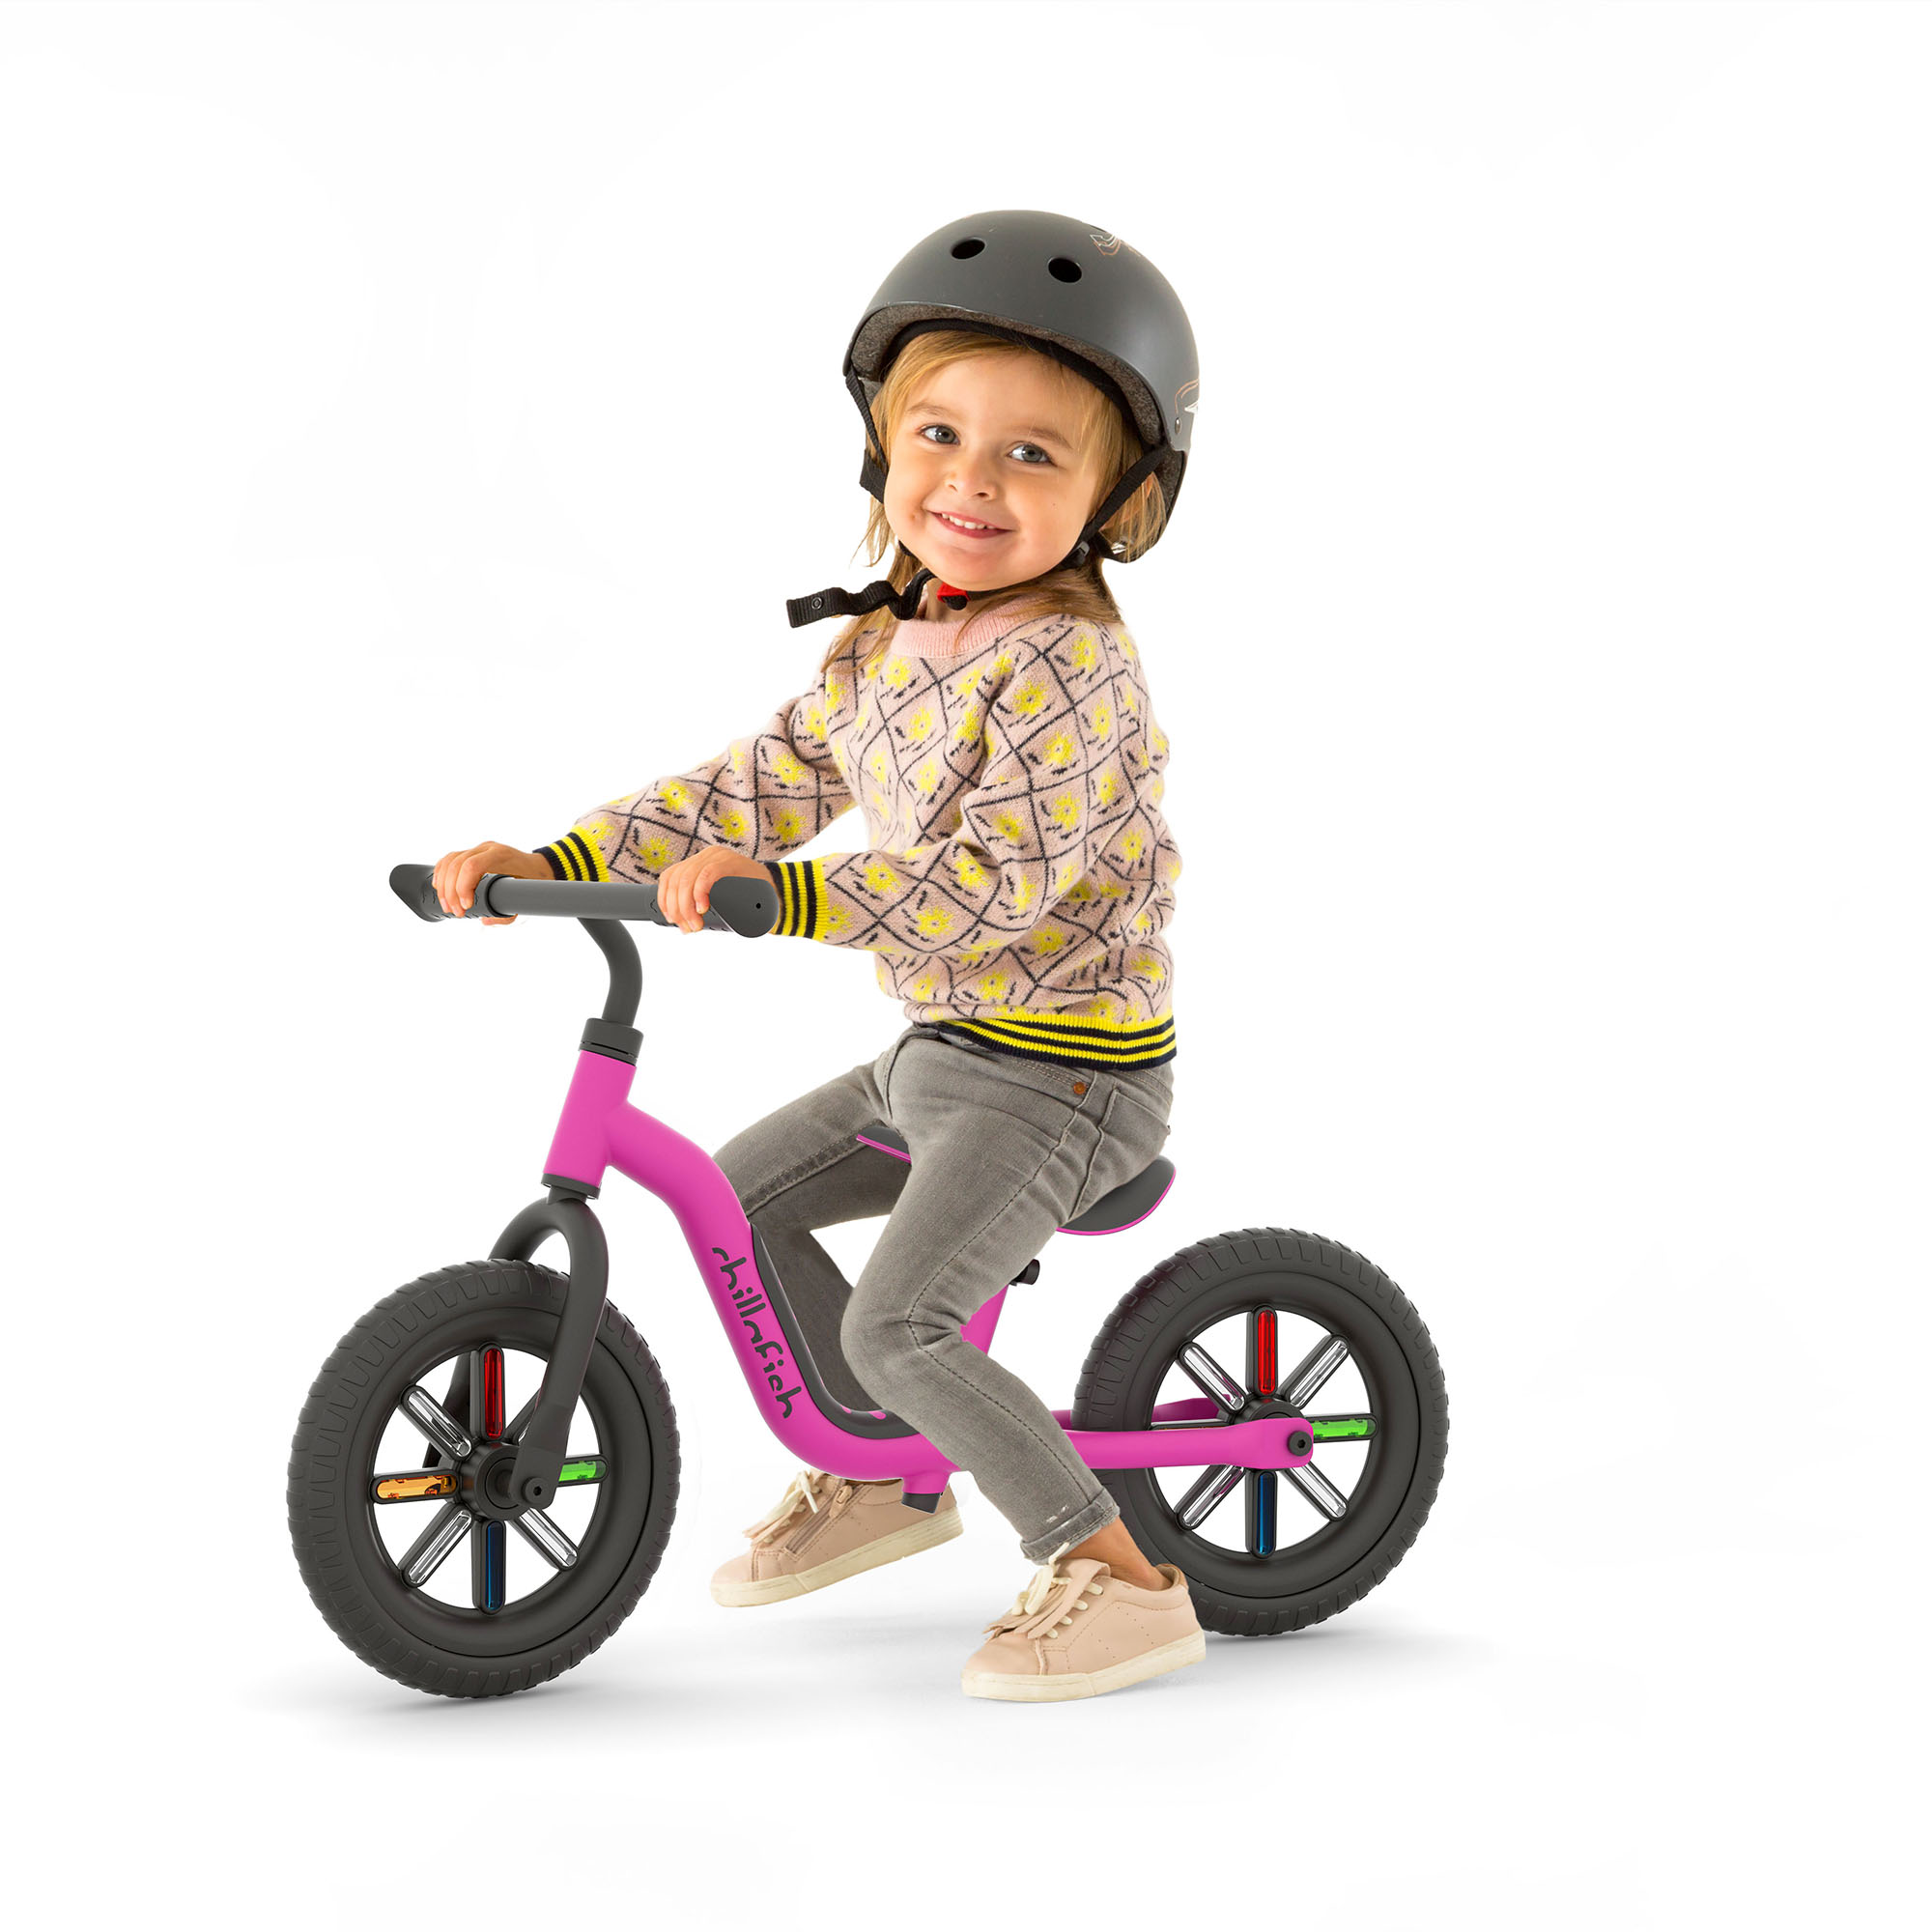 Chillafish Buzzi 10' Balance Bike for Kids 1.5 years and older, Lightweight Toddler Bike with Adjustable Seat - image 3 of 13